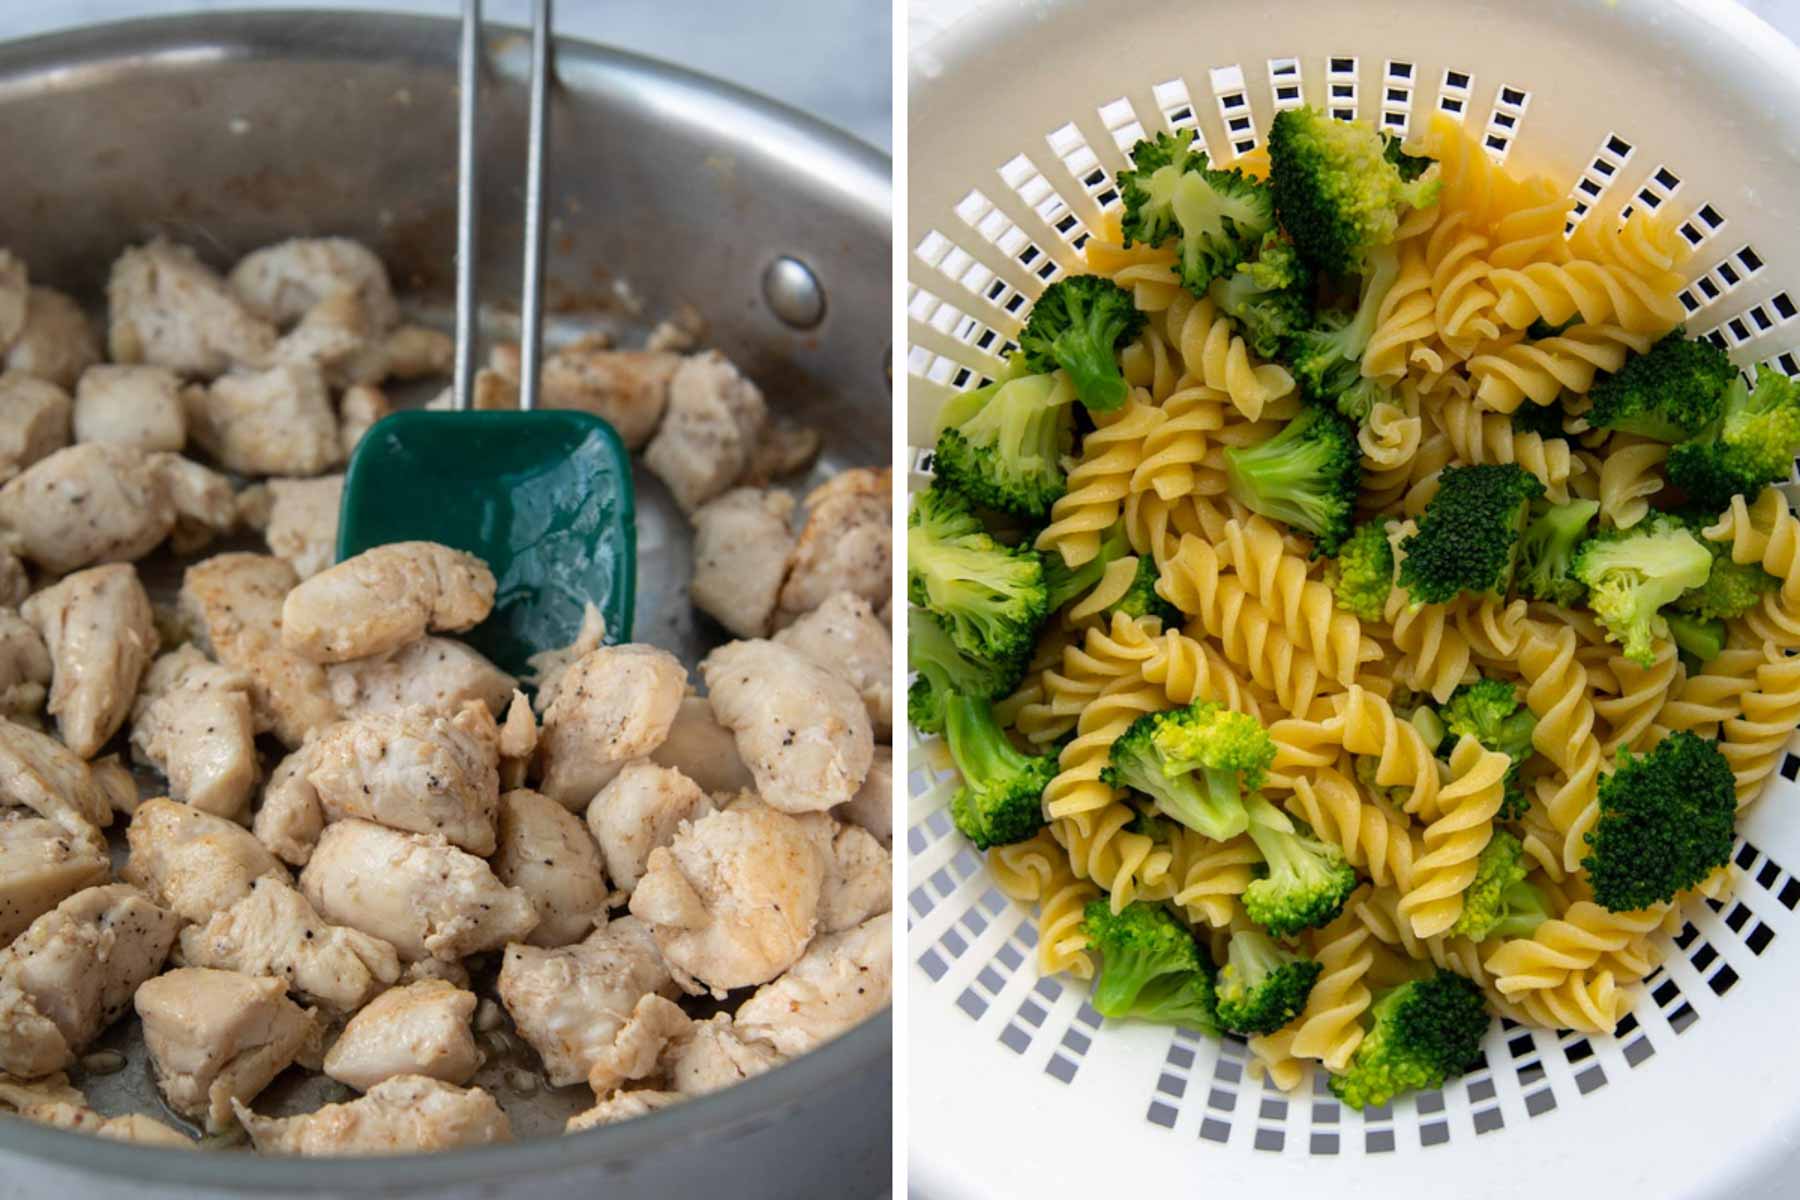 images showing the cooked chicken, pasta, and broccoli